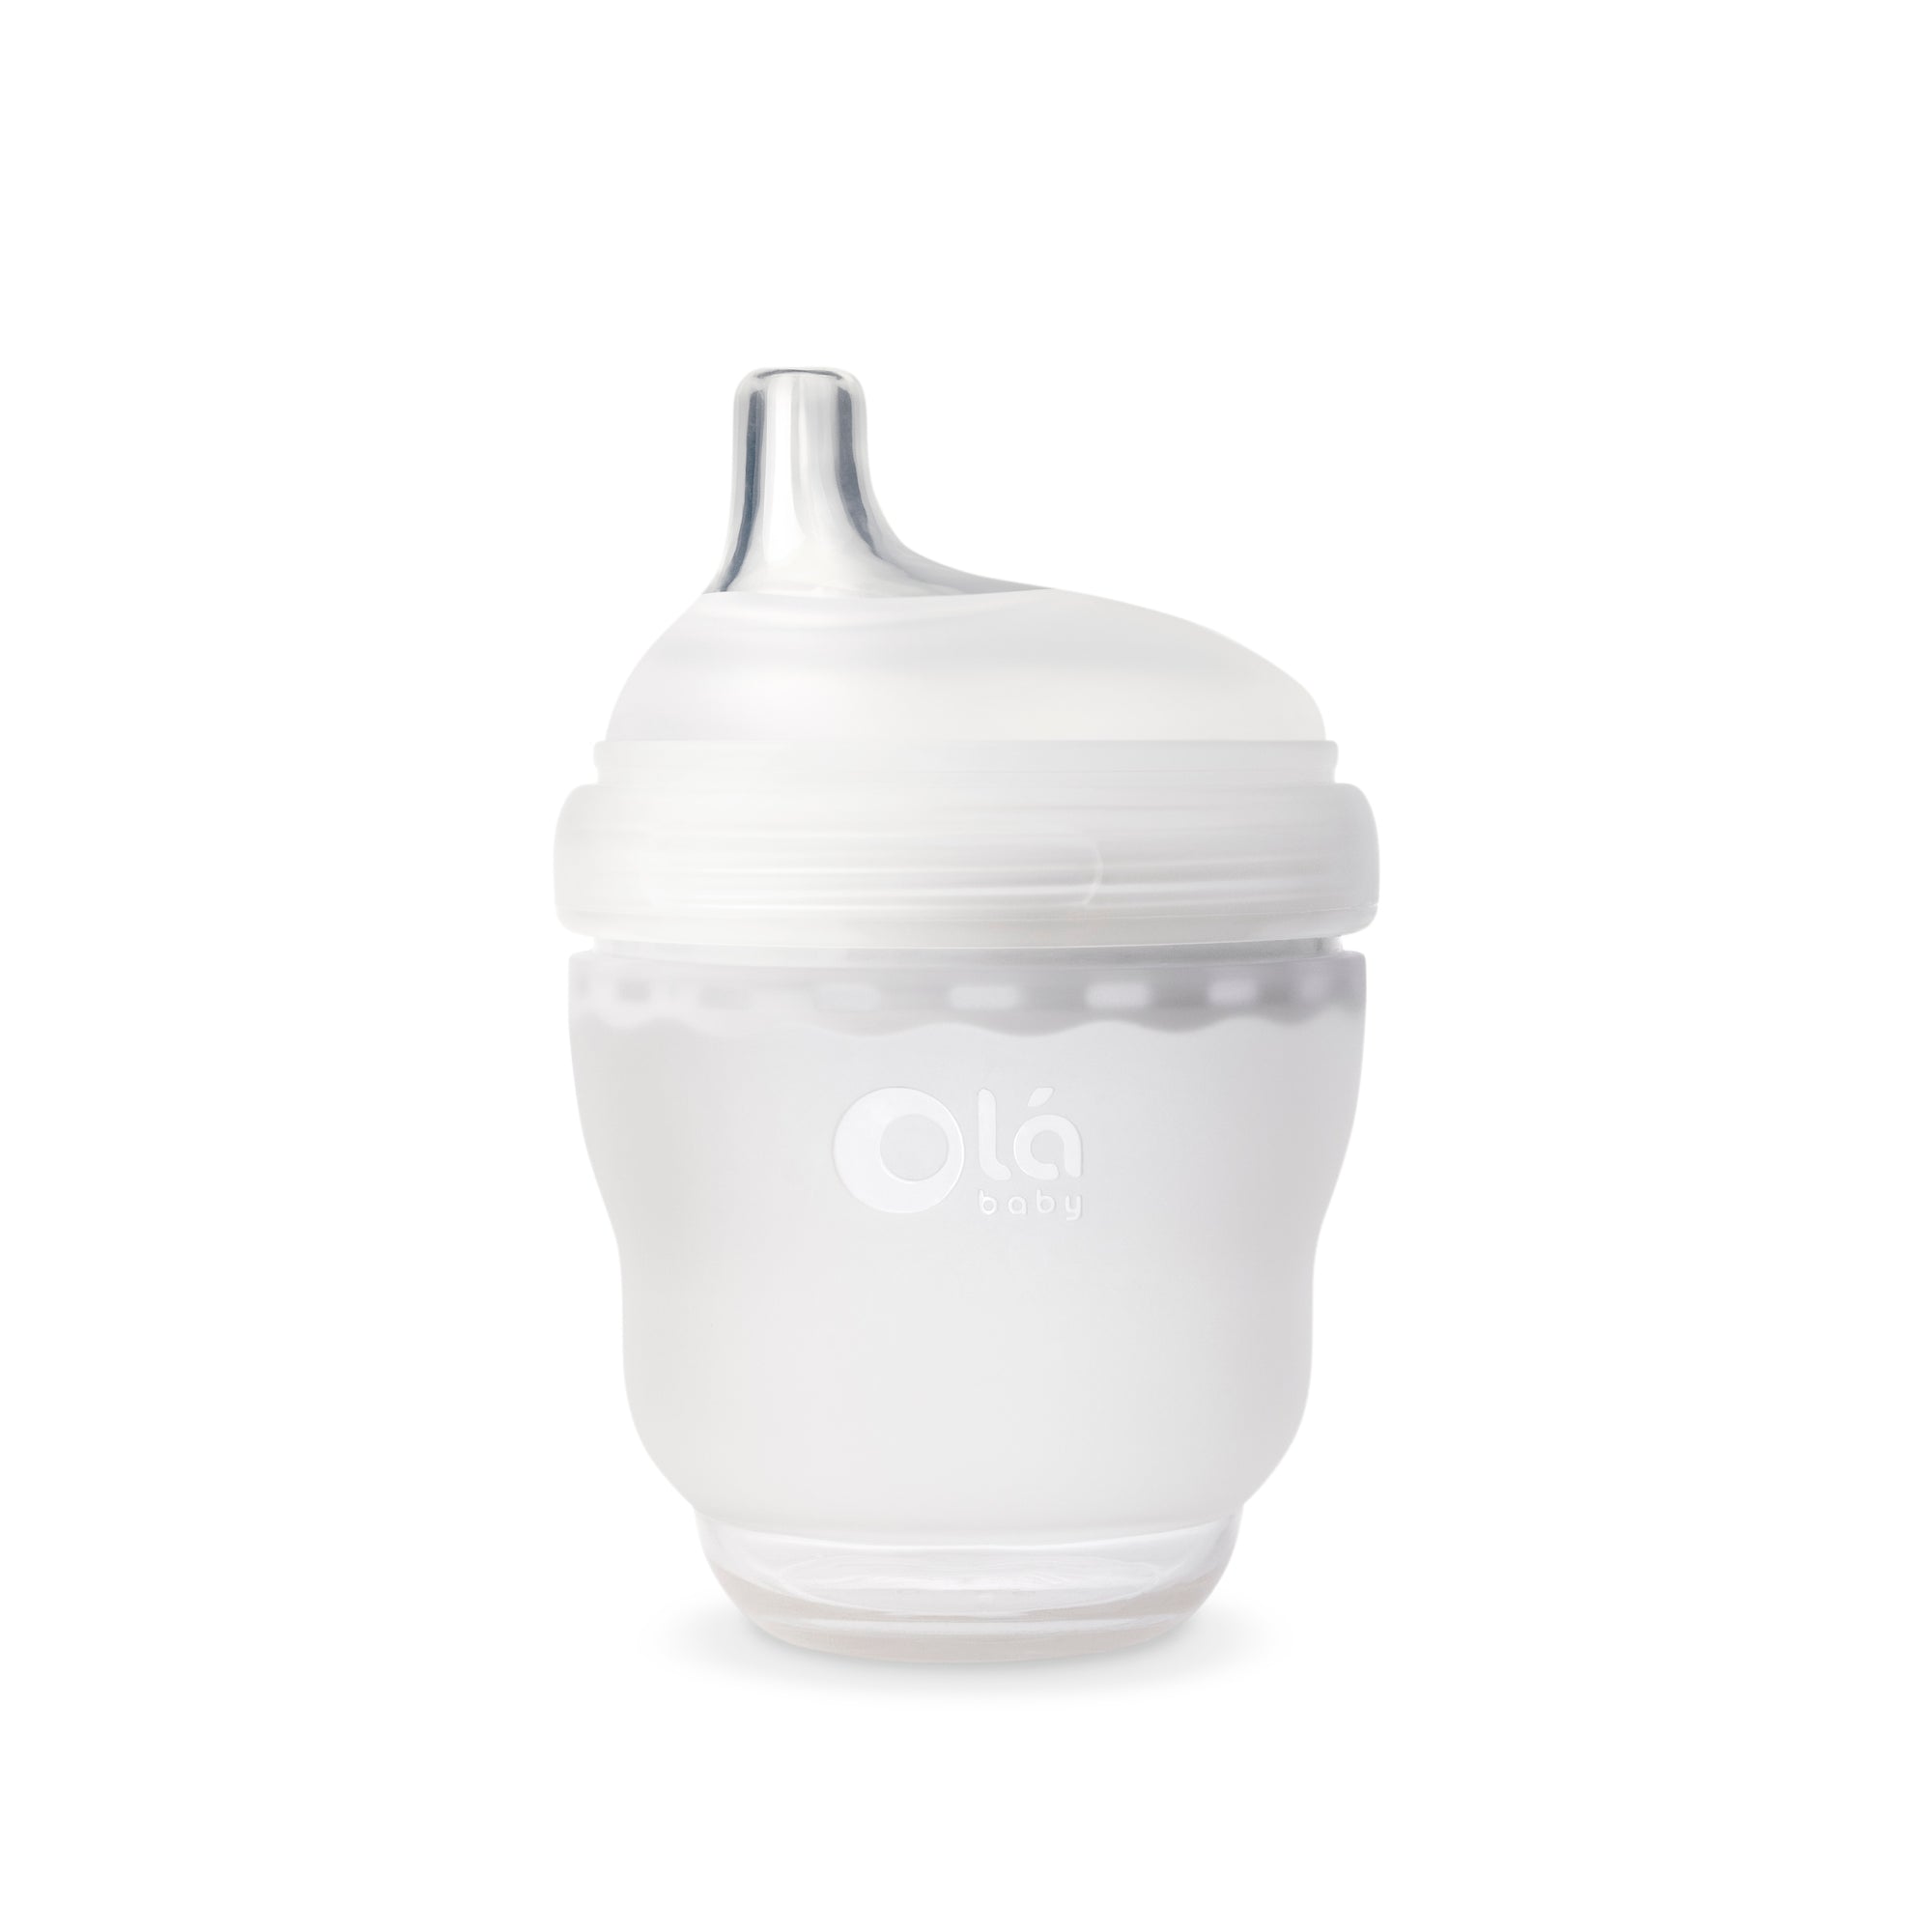 Baby Square - #olababy #sproutspoon OlaSprout baby spoon is the spoon of  choice when introducing solid foods to babies. Our baby spoon is a true  reflection of nature. It feels like a